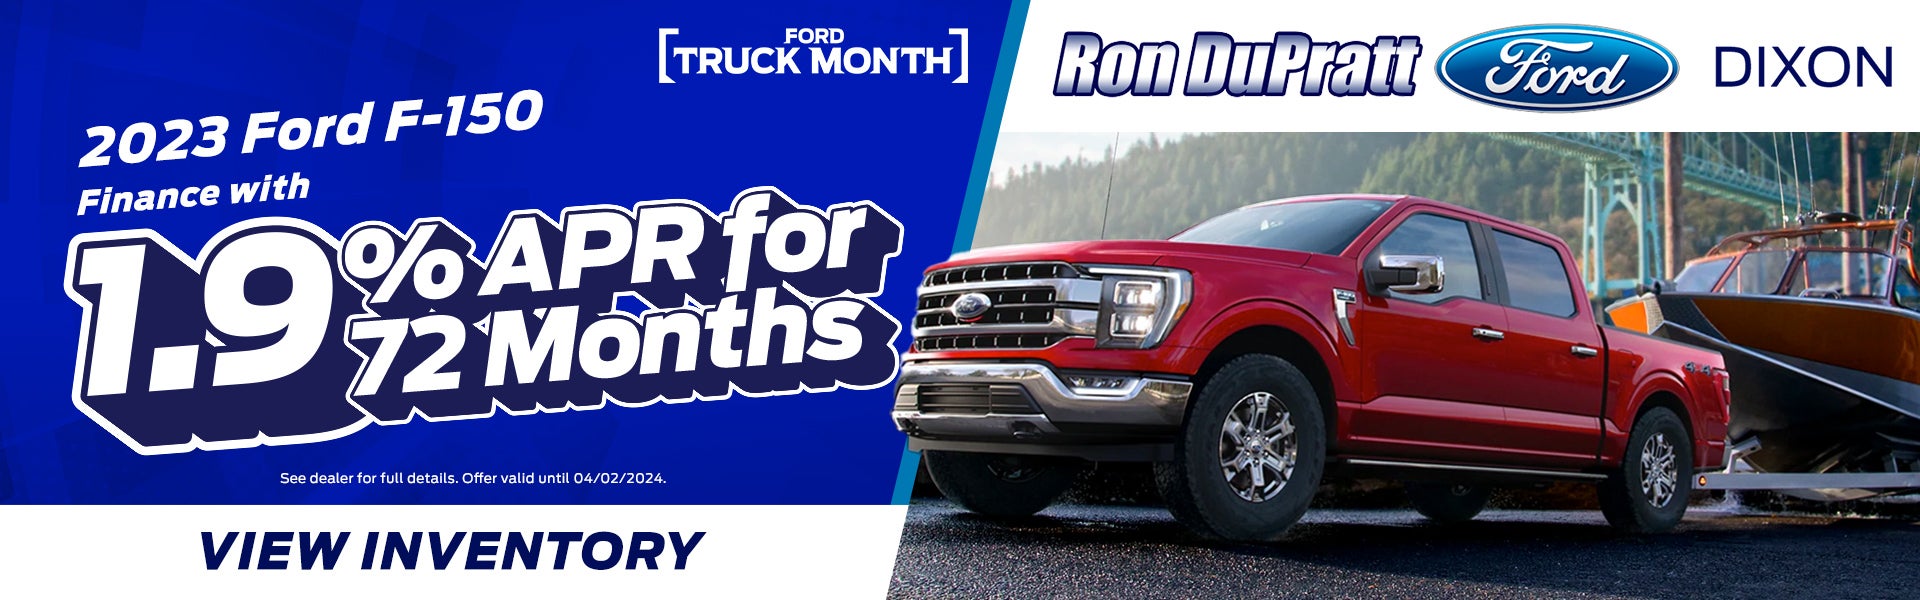 Truck Month Special Offer